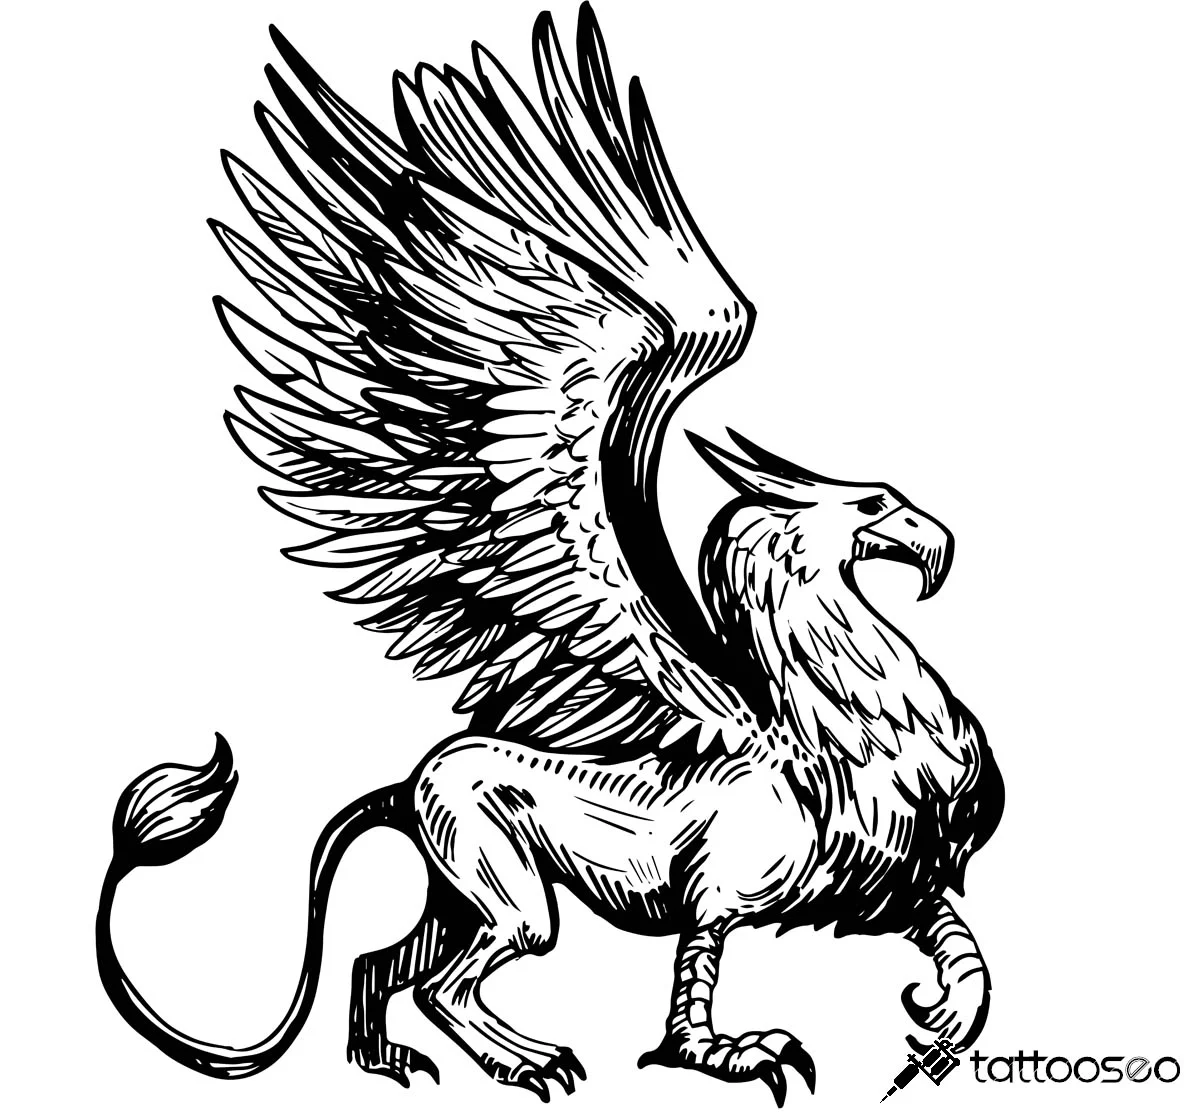 Griffin tattoo meaning